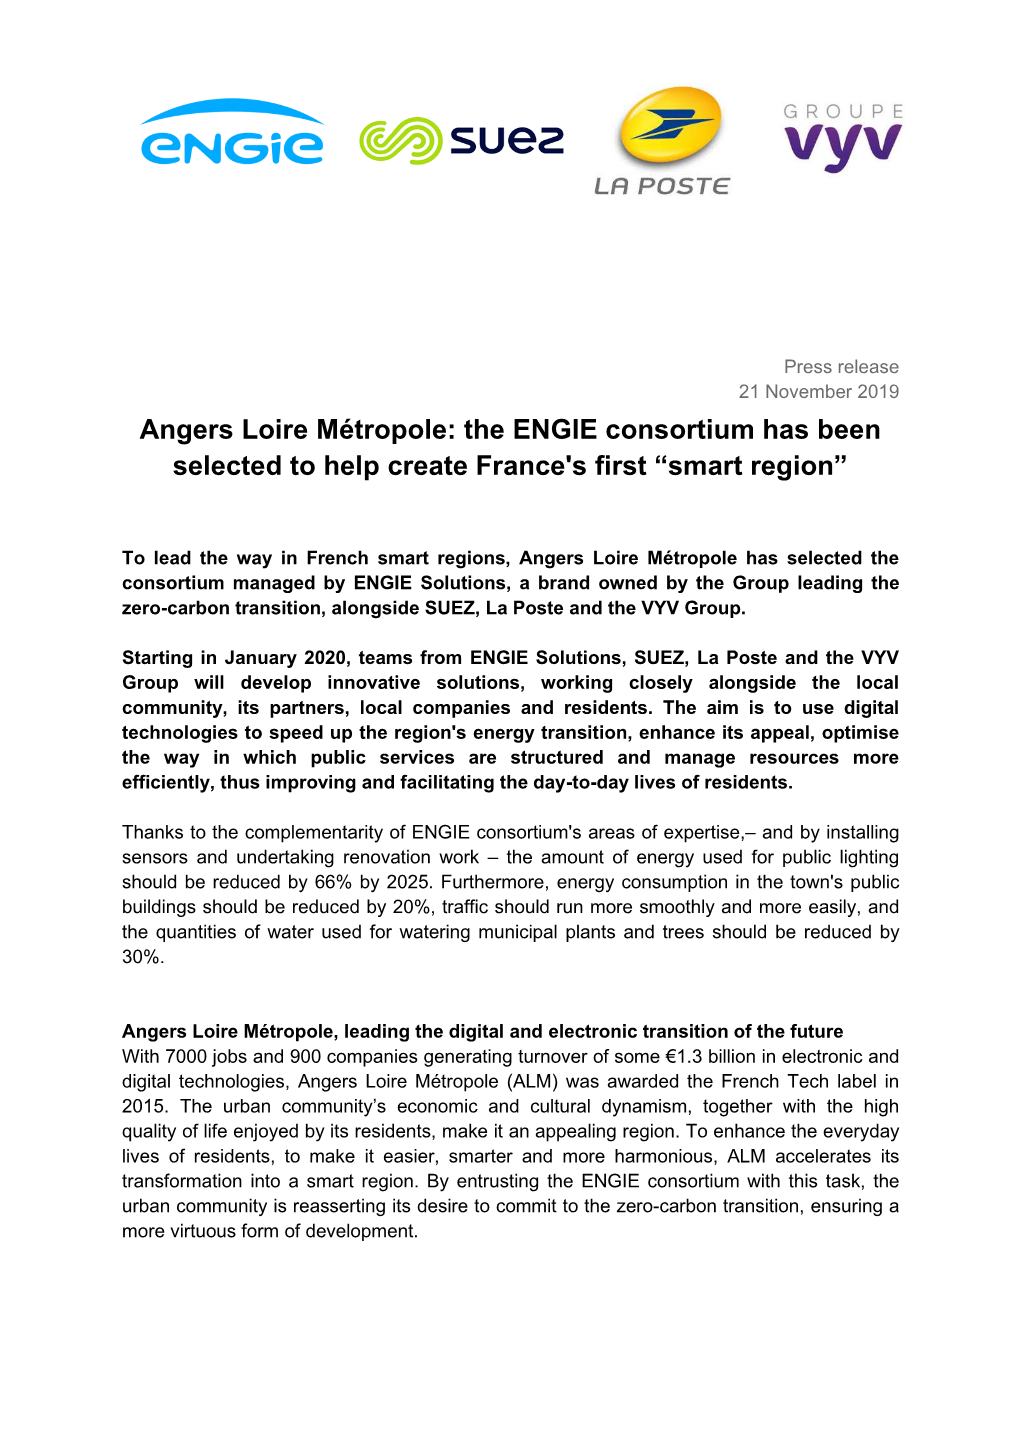 Angers Loire Métropole: the ENGIE Consortium Has Been Selected to Help Create France's First “Smart Region”